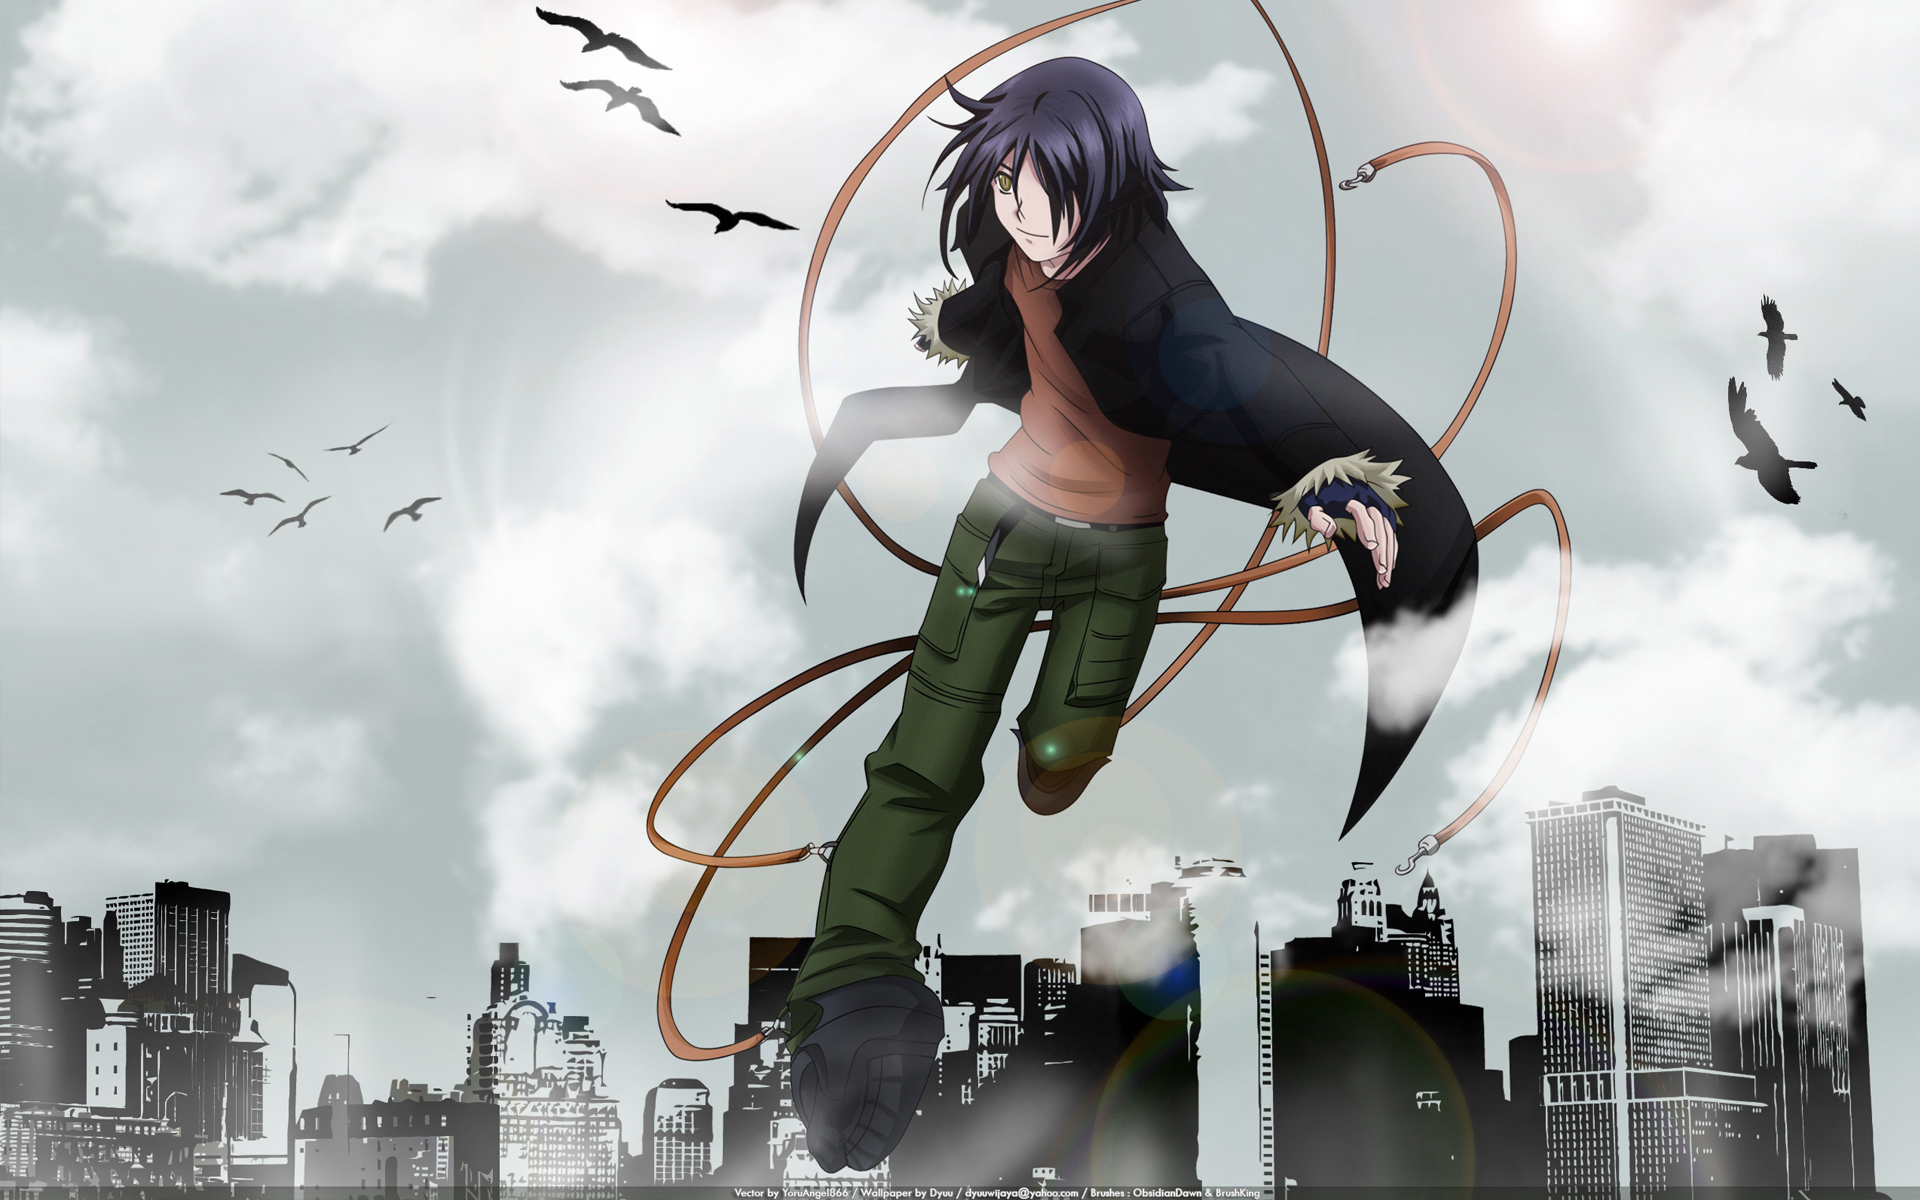 Anime-themed desktop wallpaper featuring characters from Air Gear.